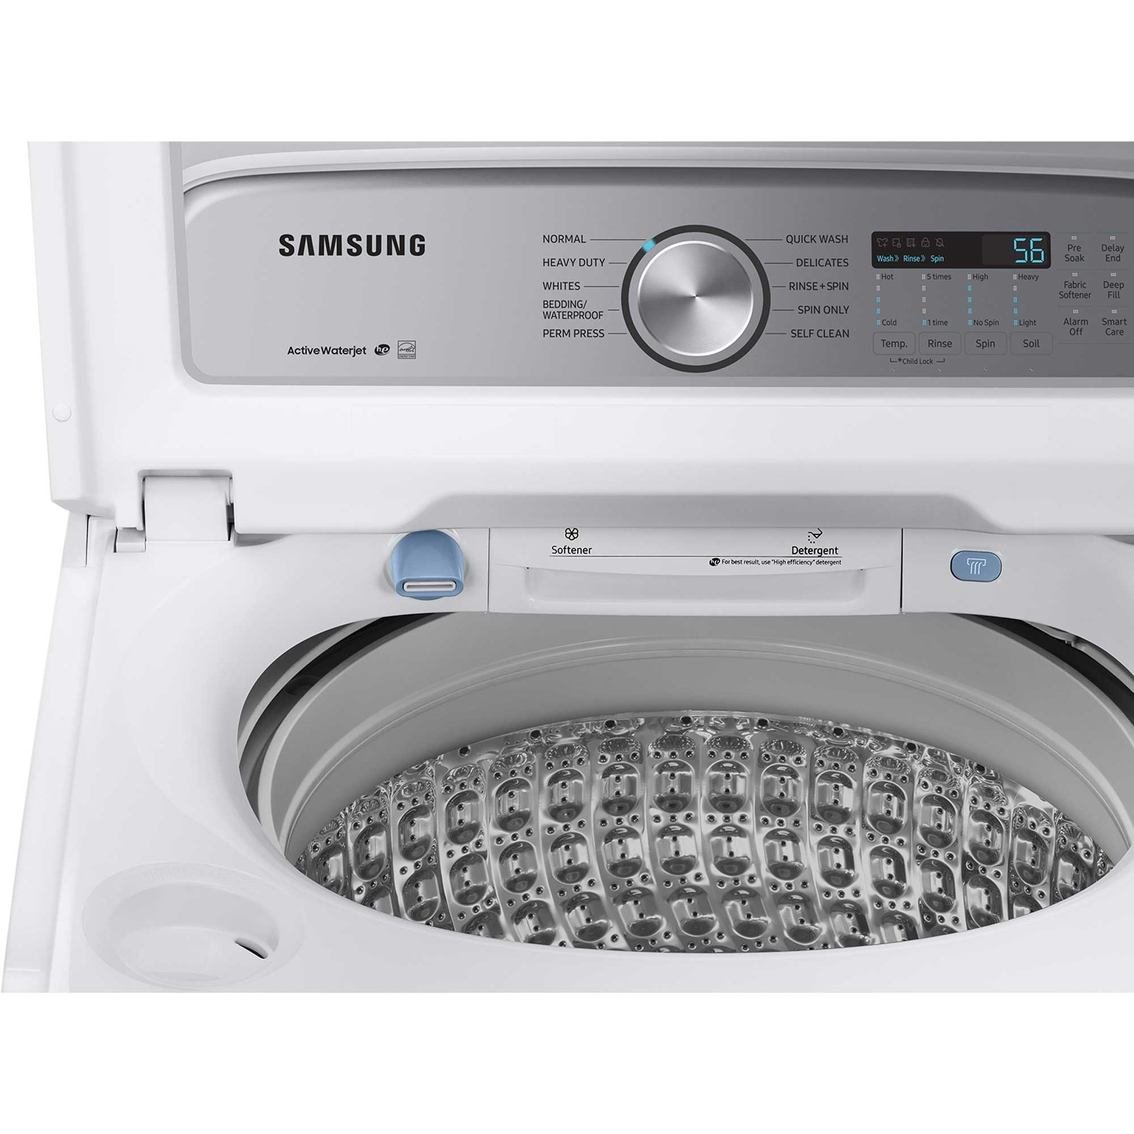 samsung-4-9-cu-ft-top-load-washer-with-activewave-agitator-and-active